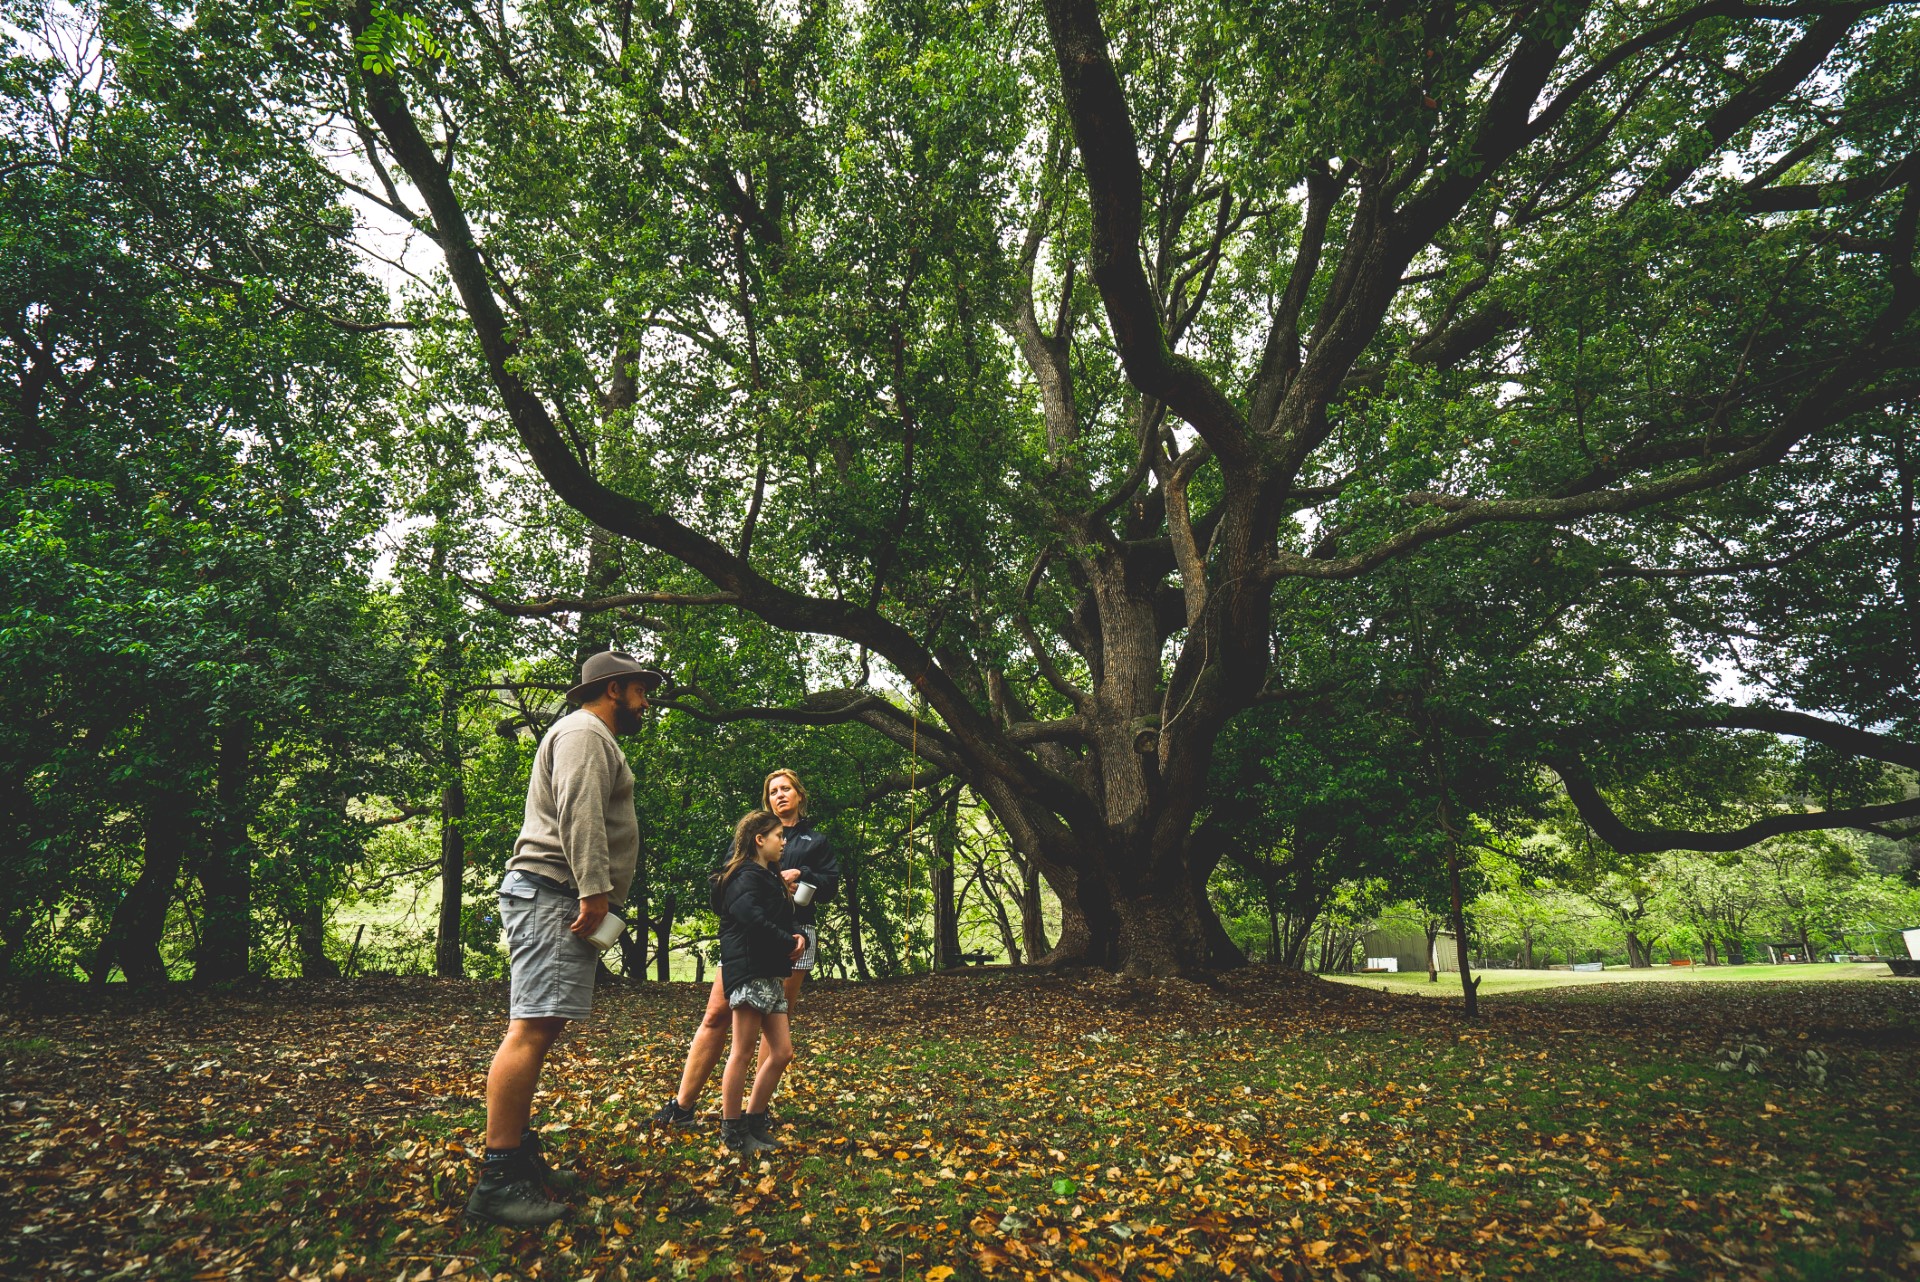 Man and children standing near large tree